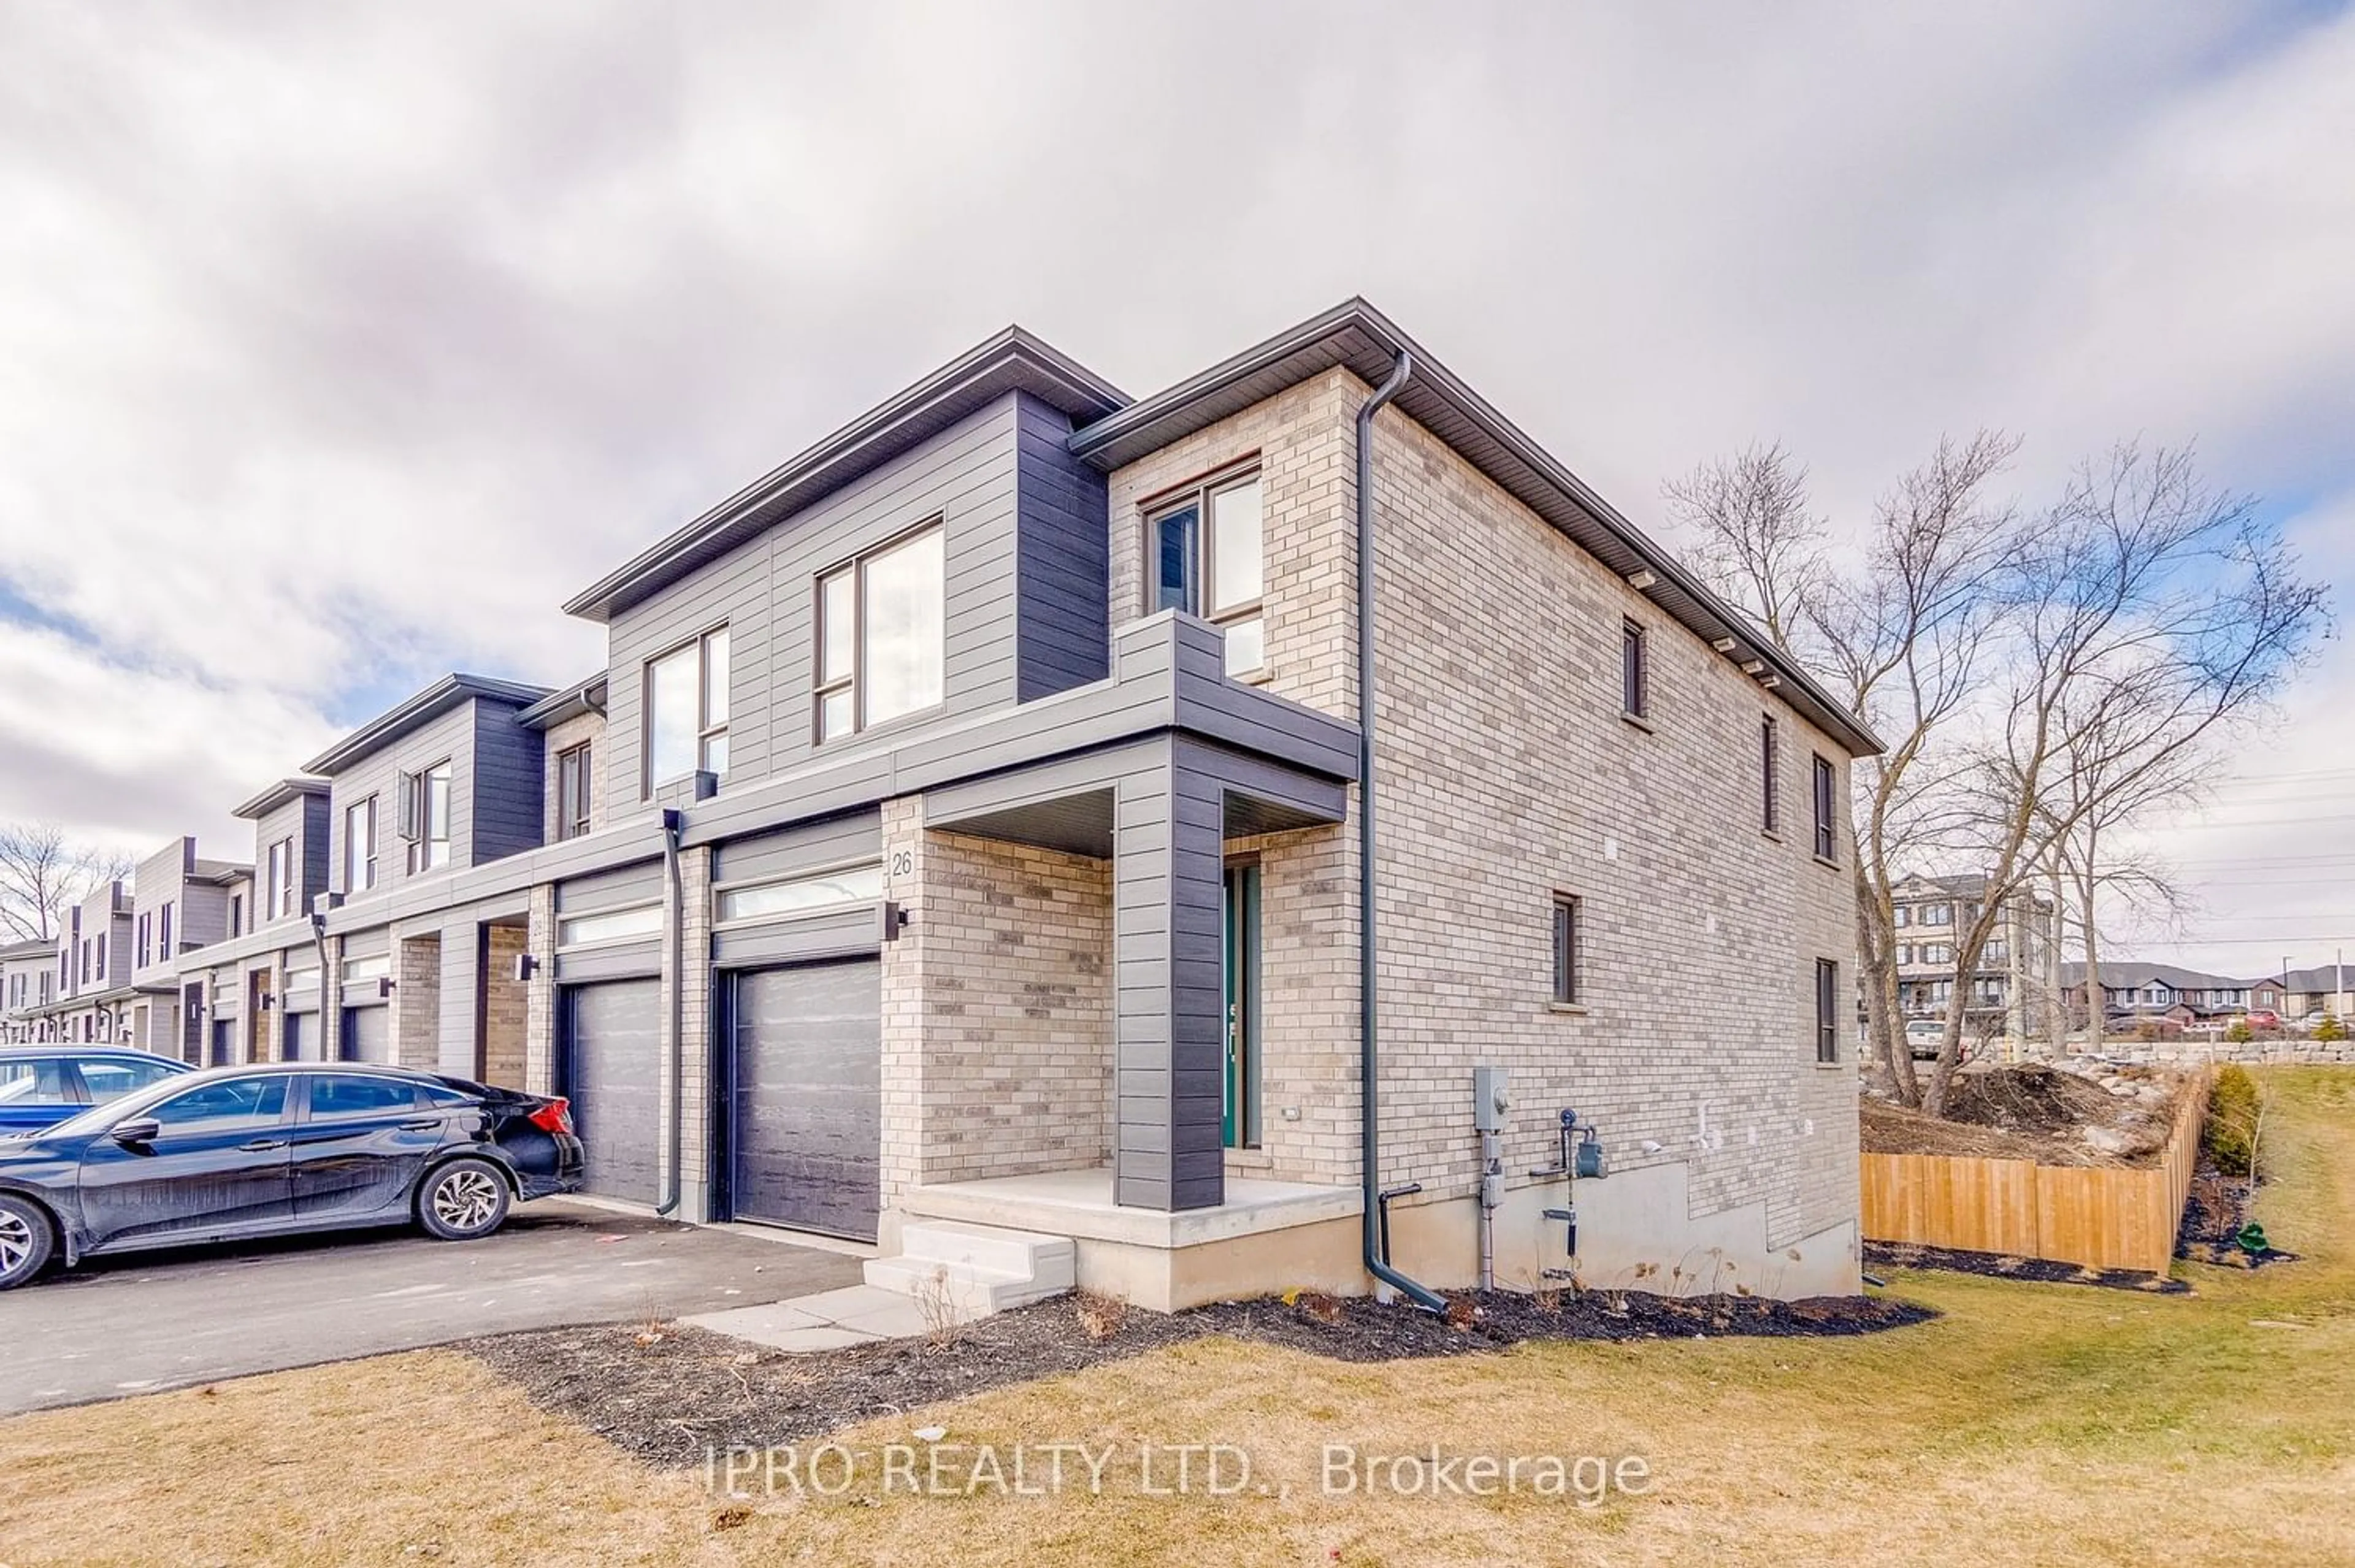 Home with brick exterior material for 26 Pony Way, Kitchener Ontario N2R 0R8